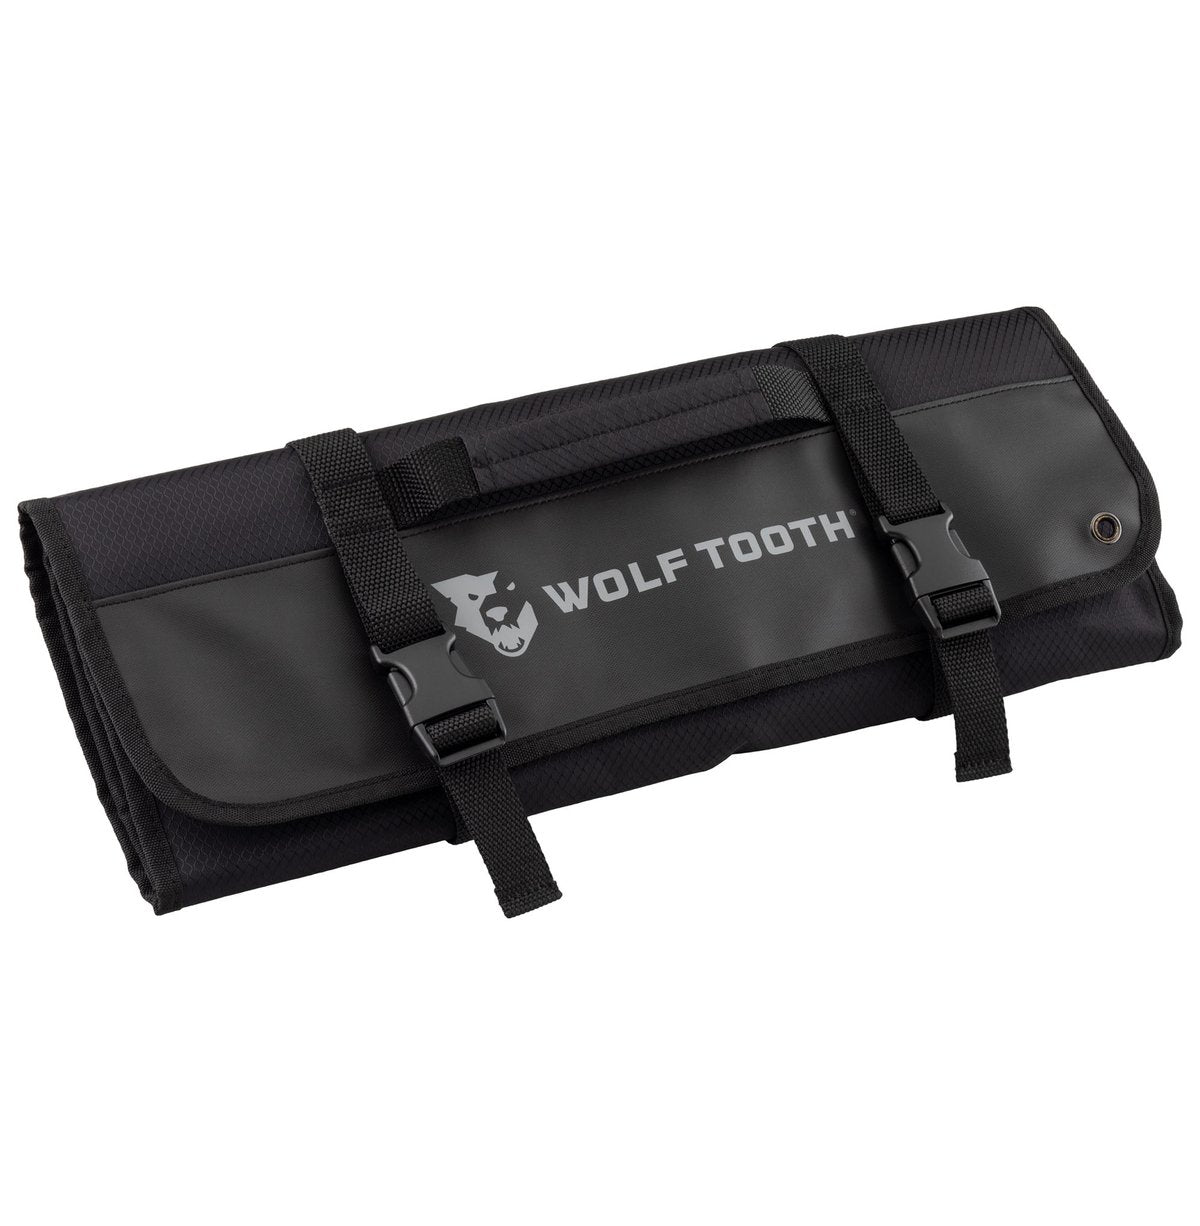 Wolf Tooth Components Travel Tool Wrap - RideCX cyclocross store